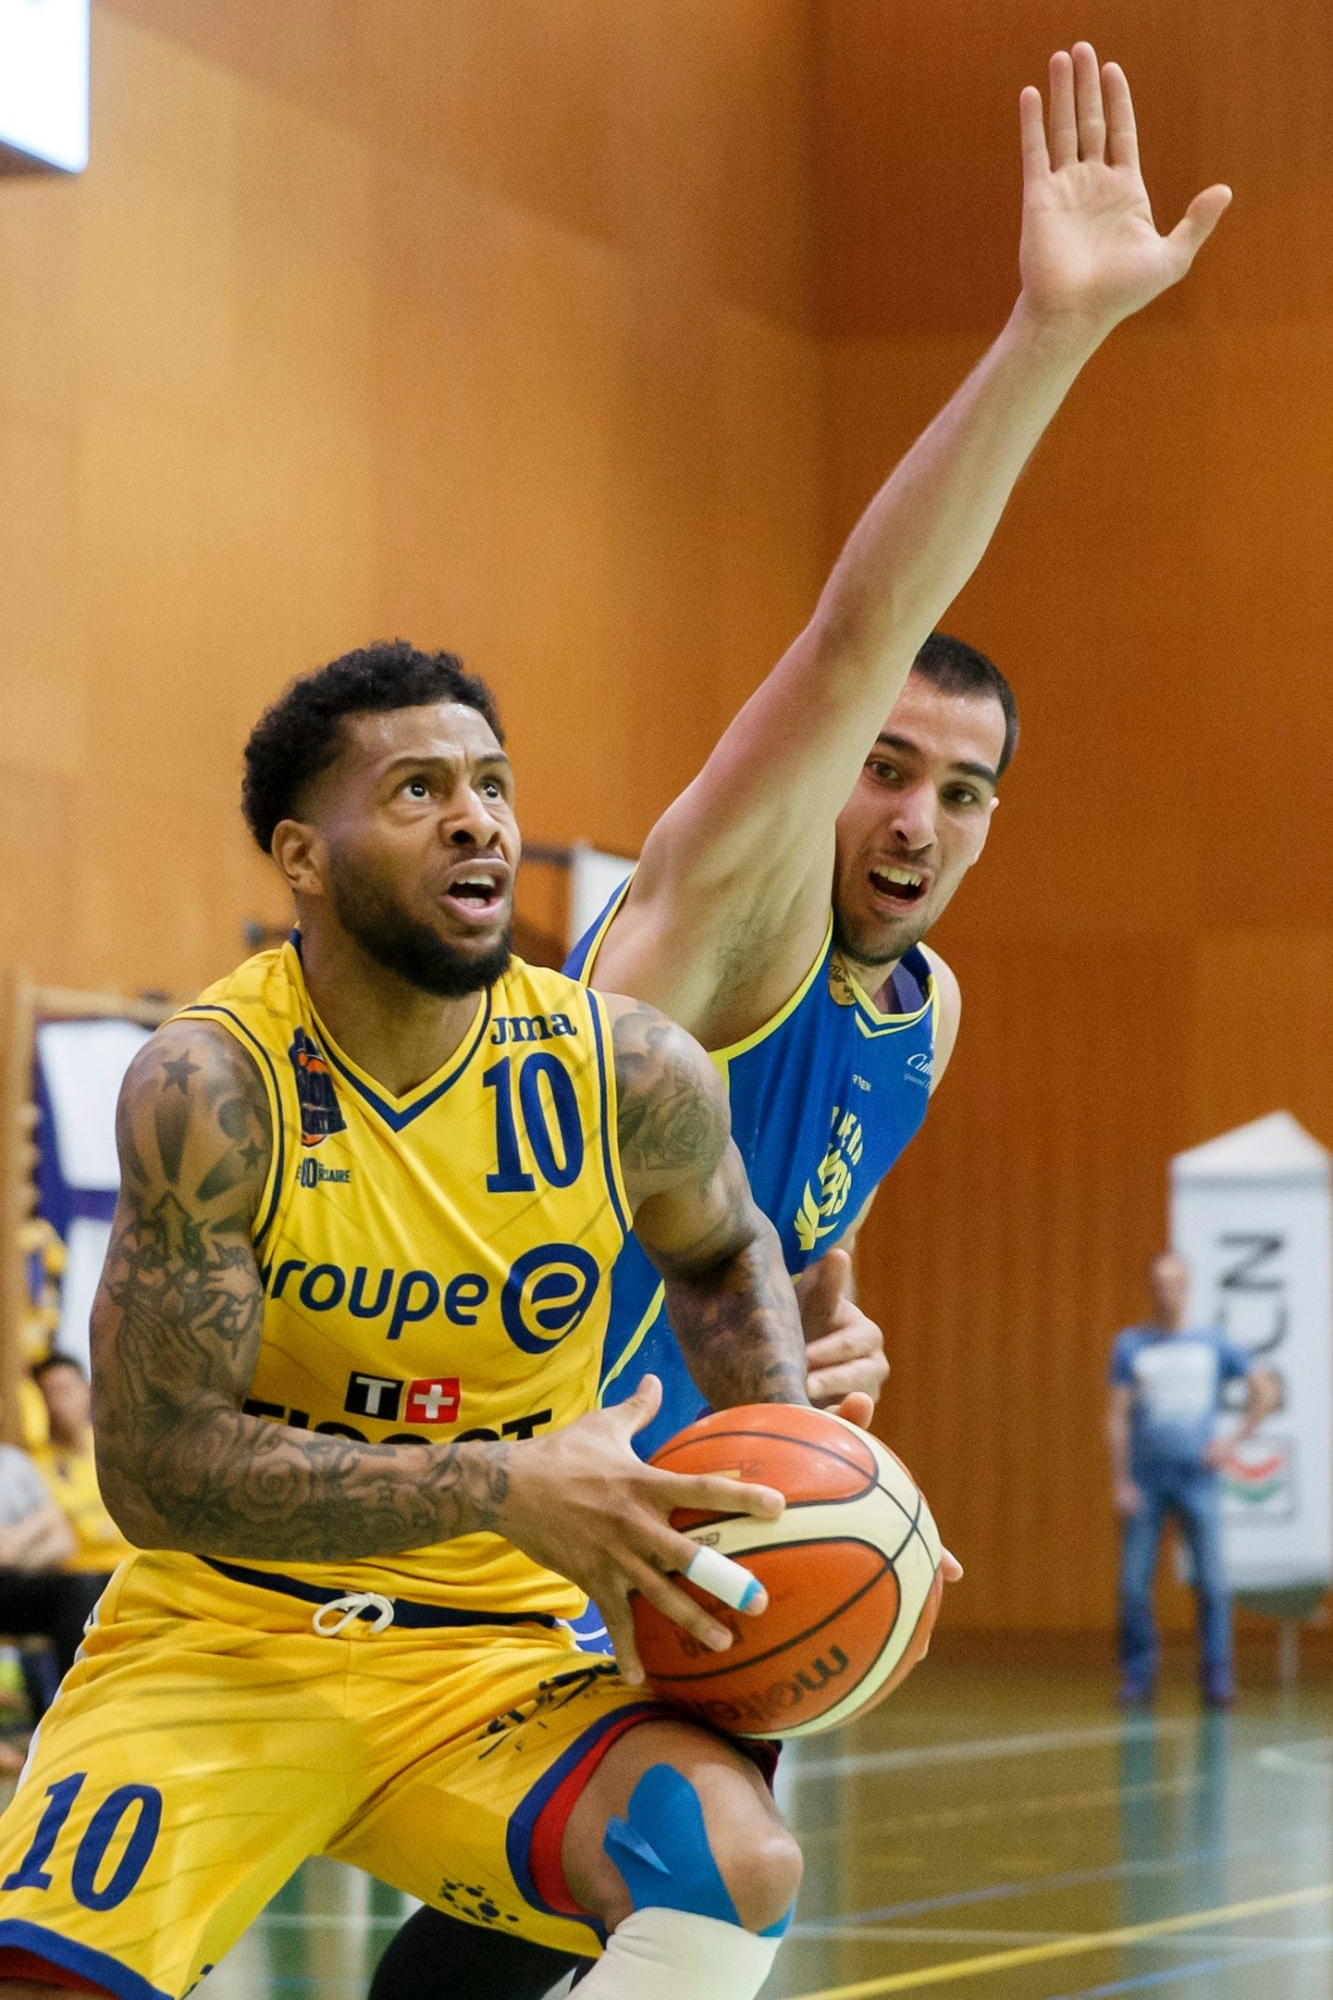 Neuchatel's Bryan Colon, left, drives to the basket against Riviera Lakers' Pedro Pessoa, right, during the second leg of the playoffs quarterfinals game of National League A of Swiss basketball Championship between Union Neuchatel Basket and Riviera Lakers, at the sports hall de la Riveraine in Neuchatel, Switzerland, Tuesday, May 7, 2019. (KEYSTONE/Salvatore Di Nolfi) SWITZERLAND BASKETBALL PLAYOFF FINAL NEUCHATEL RIVERA